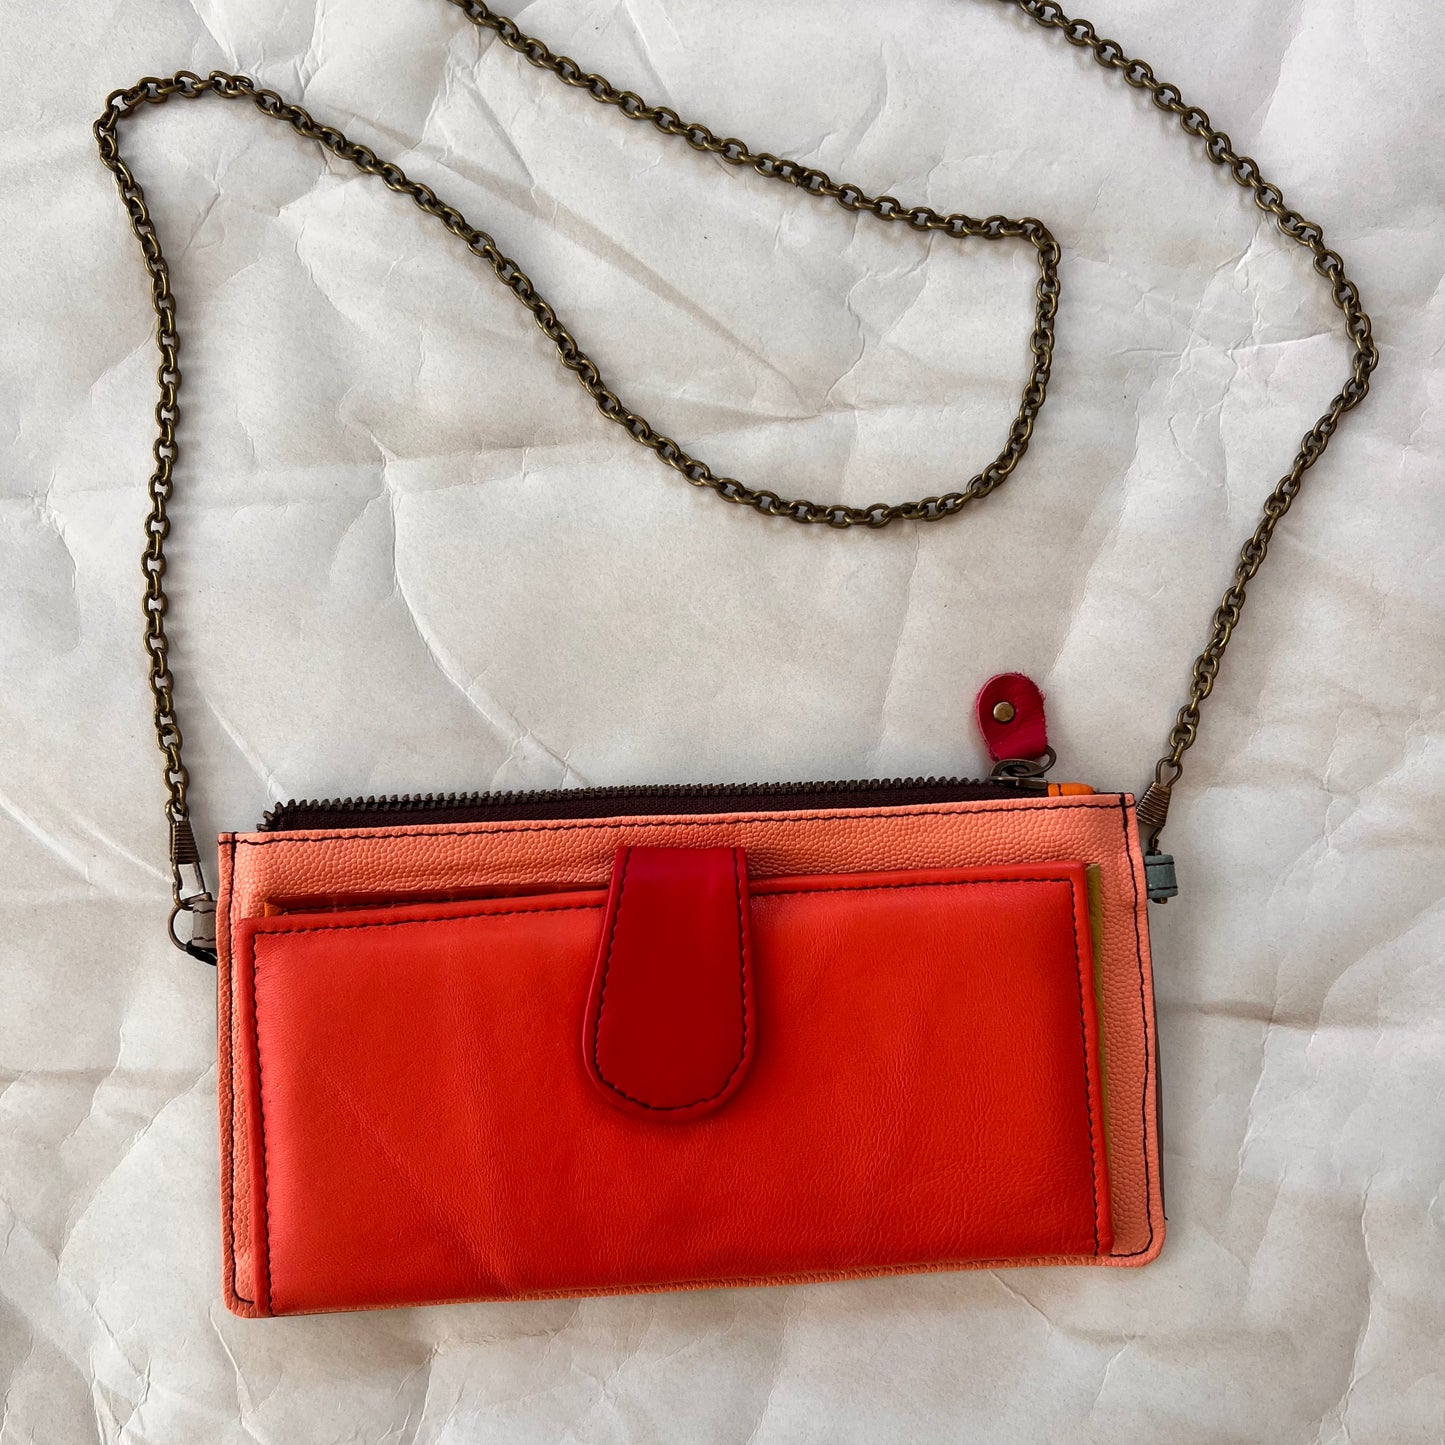 coral kimber wallet with crossbody chain attached.